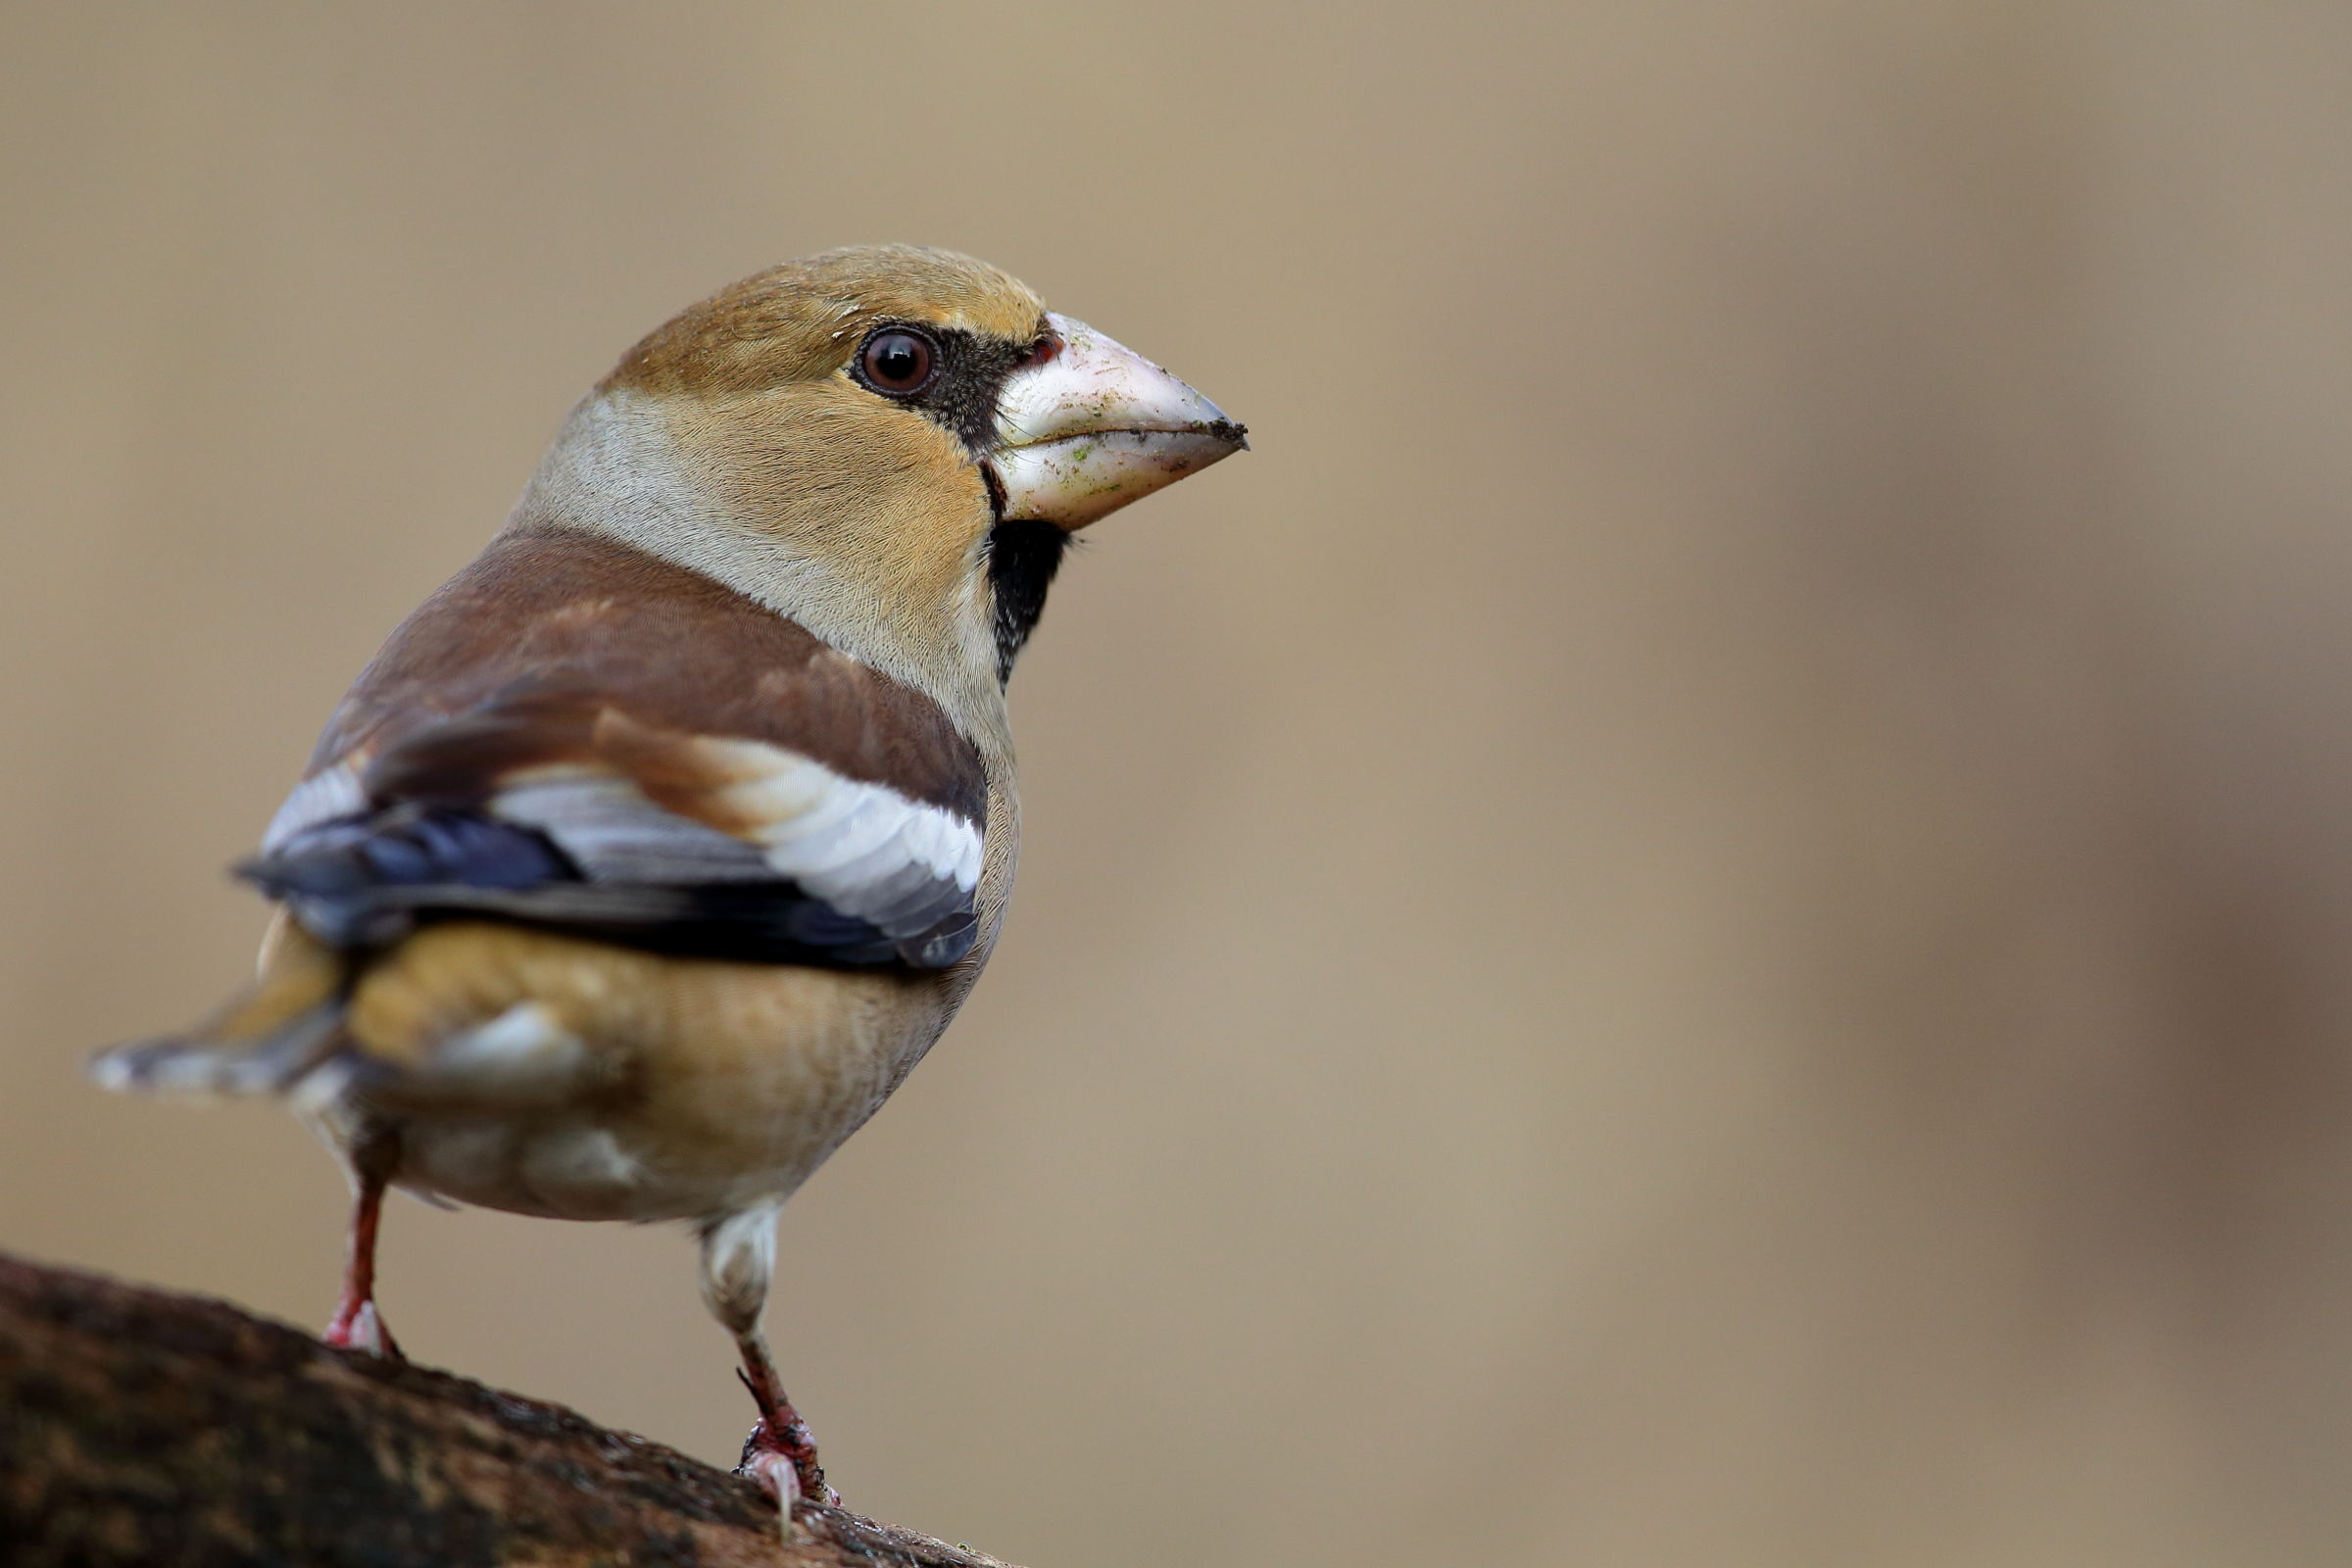 Hawfinch after the meal...